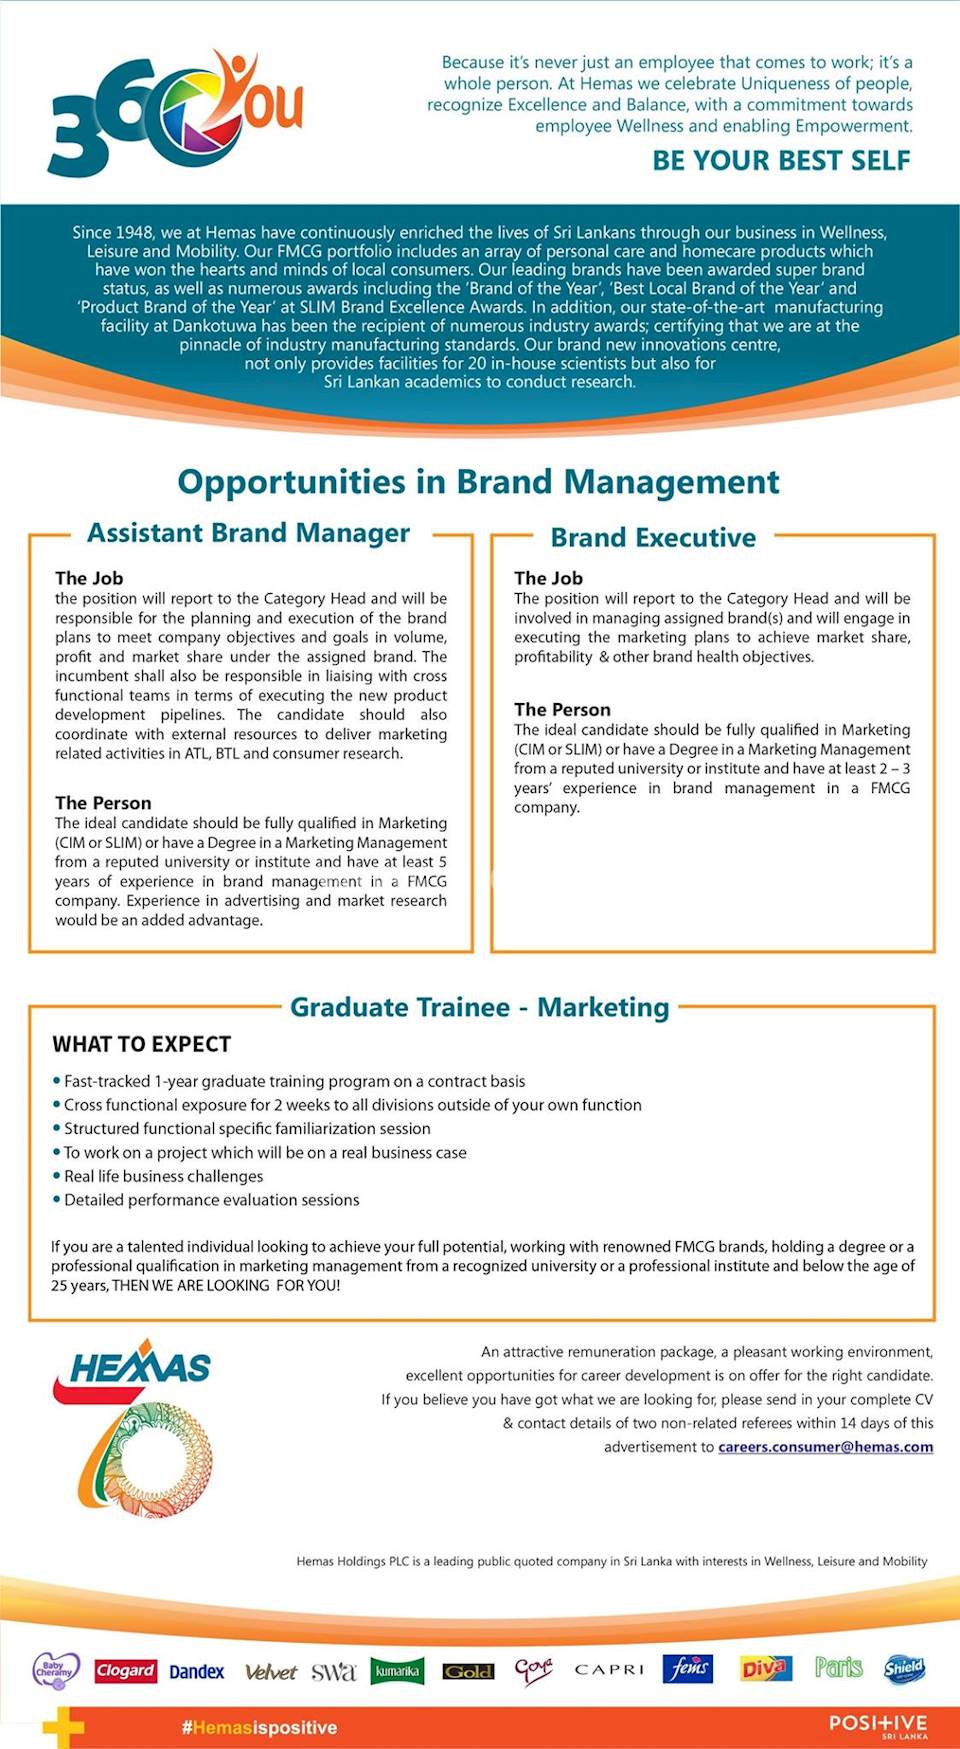 Opportunities in Brand Management 